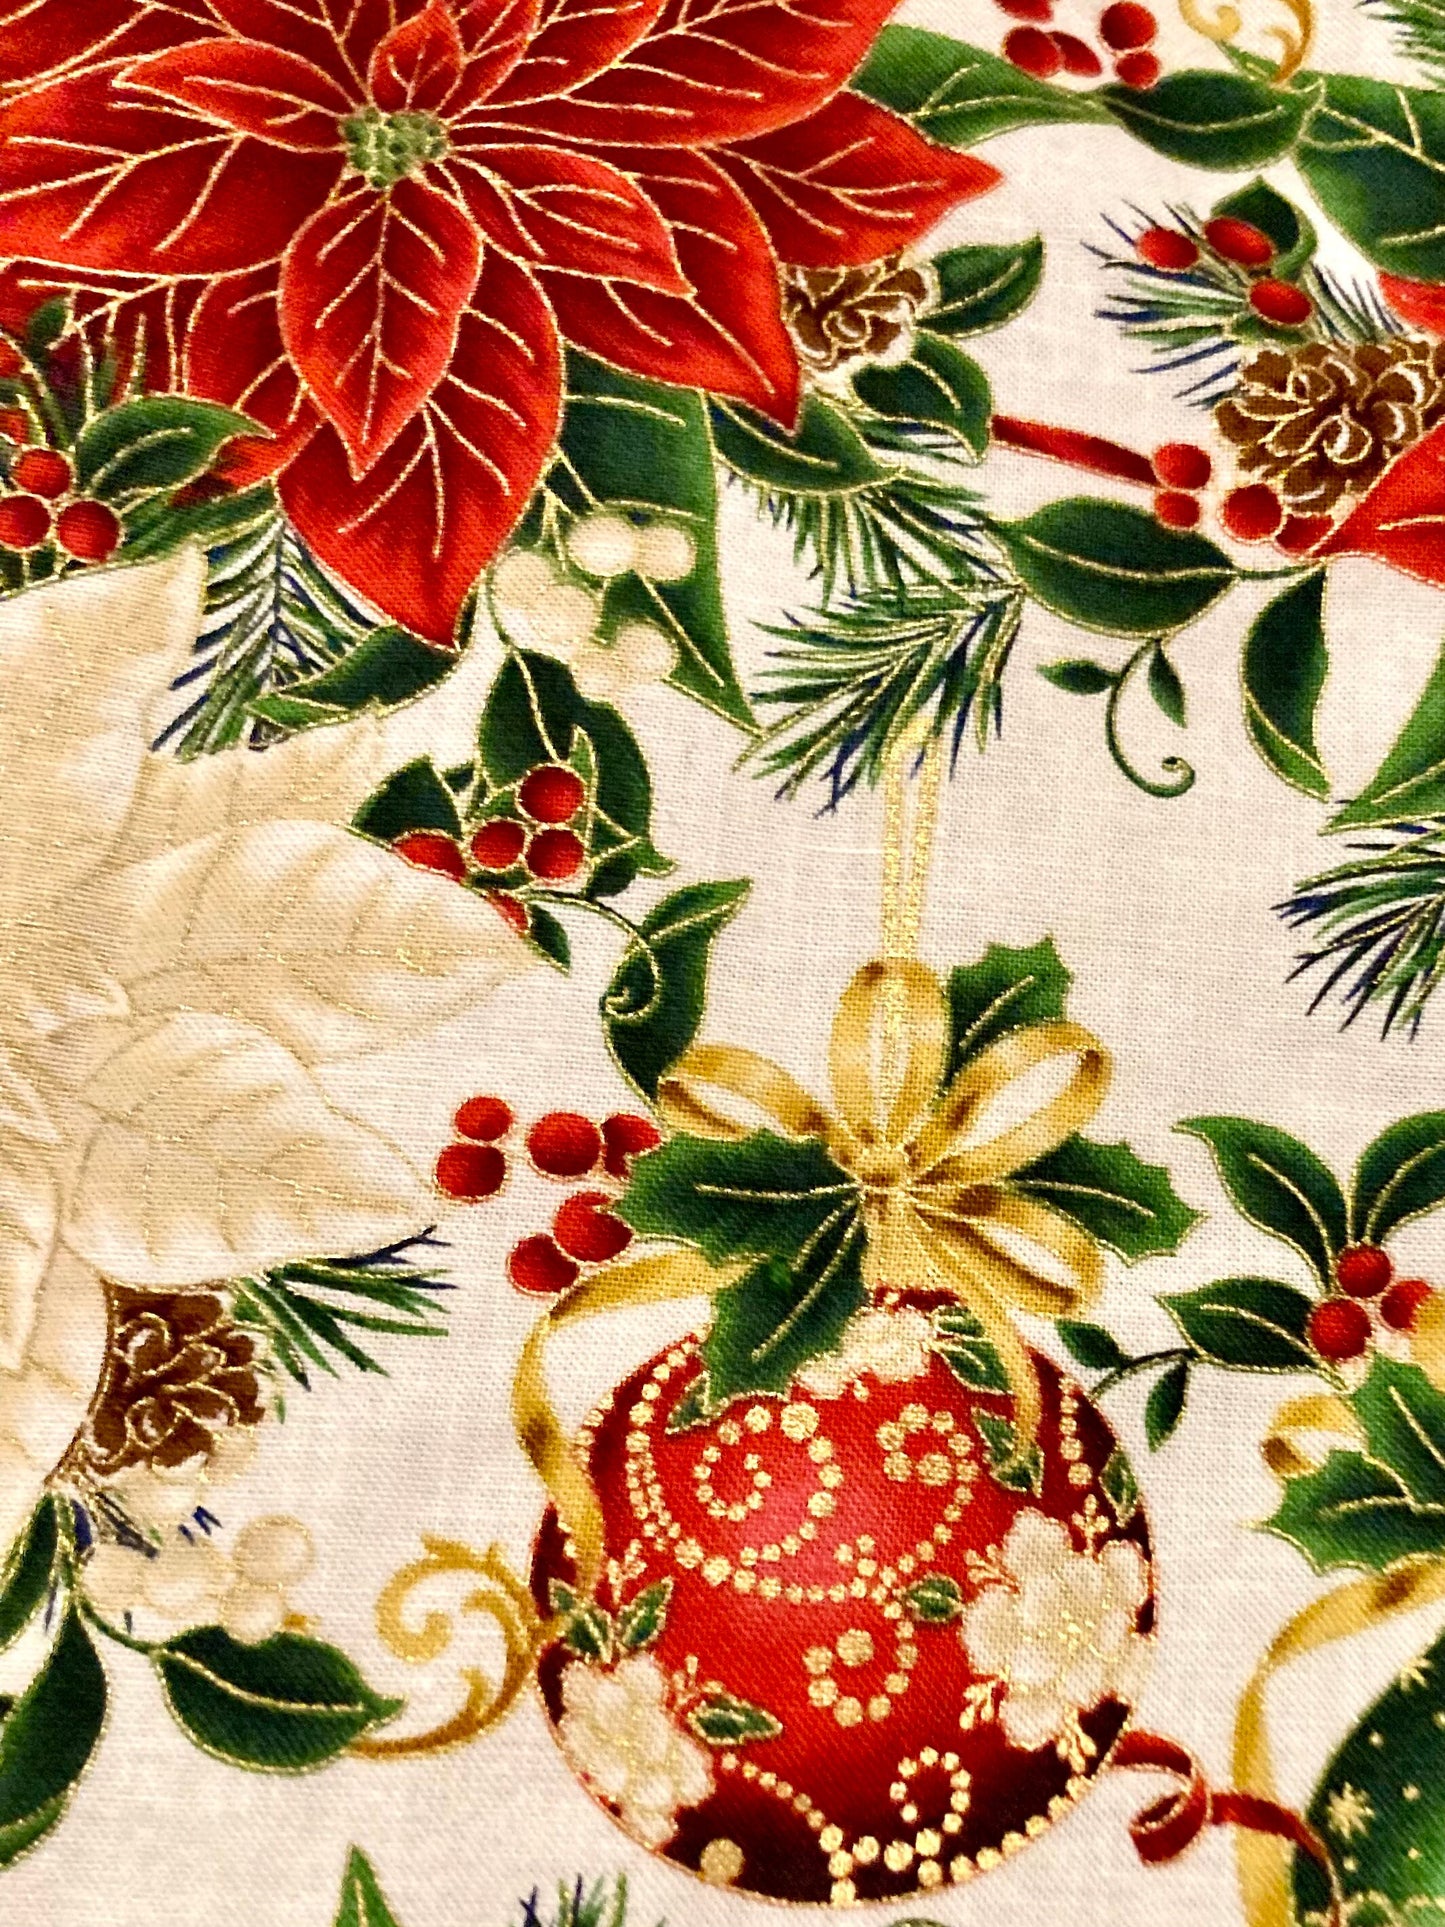 Gorgeous Christmas reversible blanket and decor